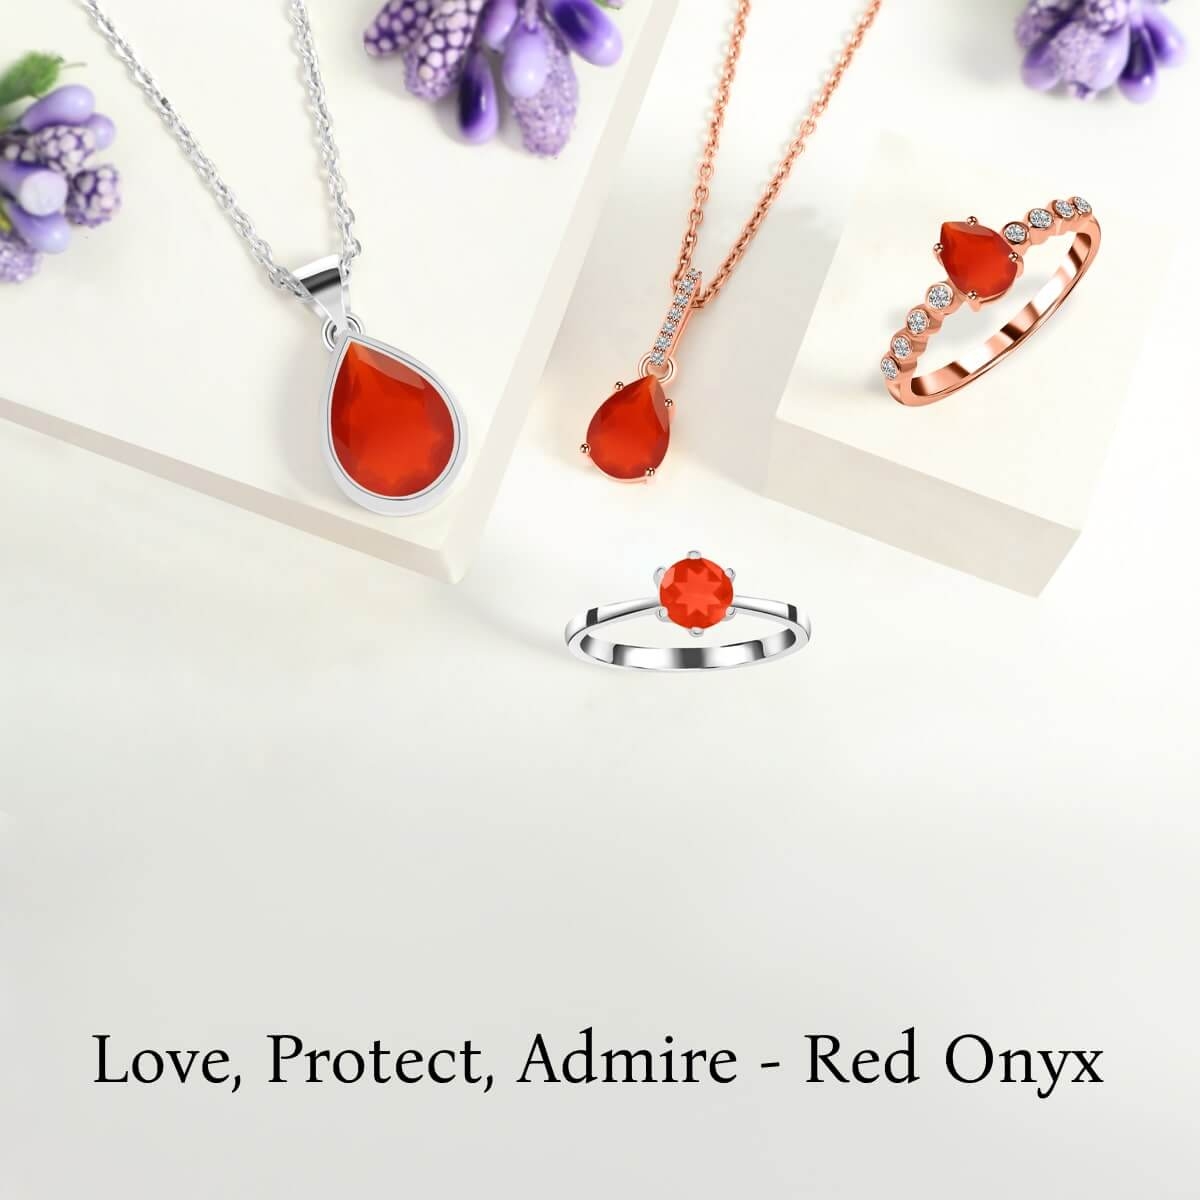 How to Care & Maintain Your Red Onyx Jewelry